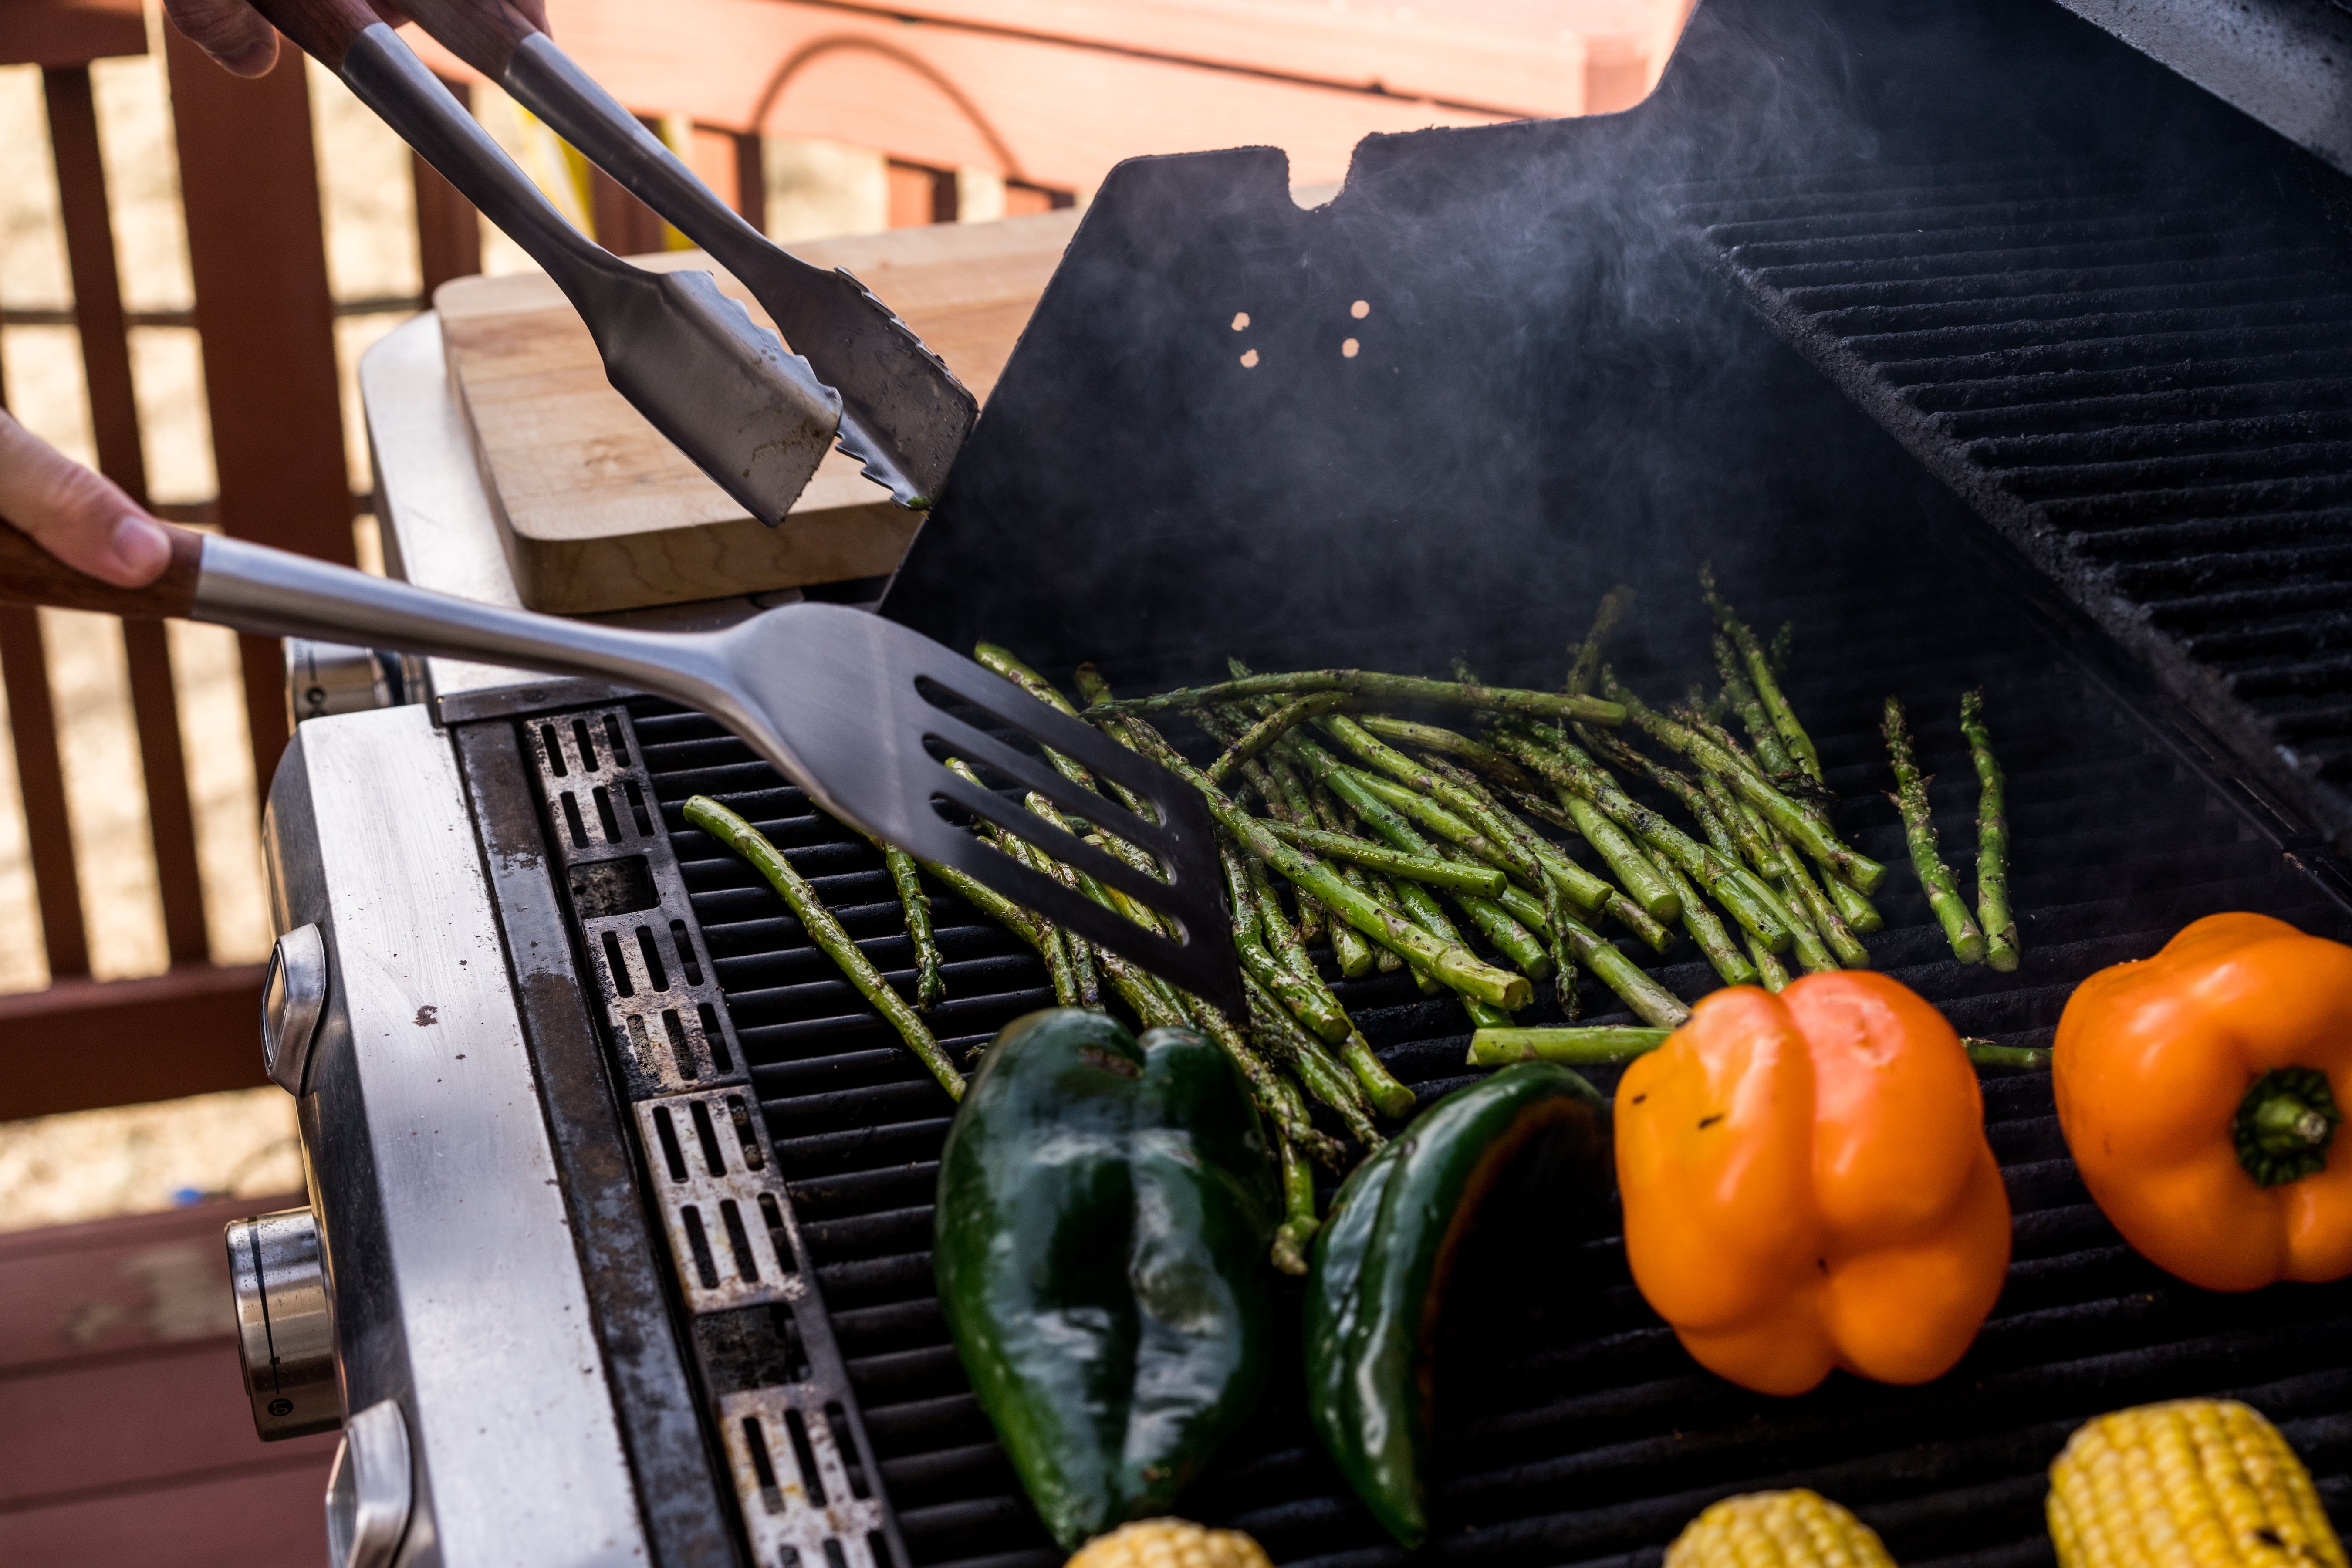 BBQ Tools Sets - Let's Make Grilling Easy – Dalstrong